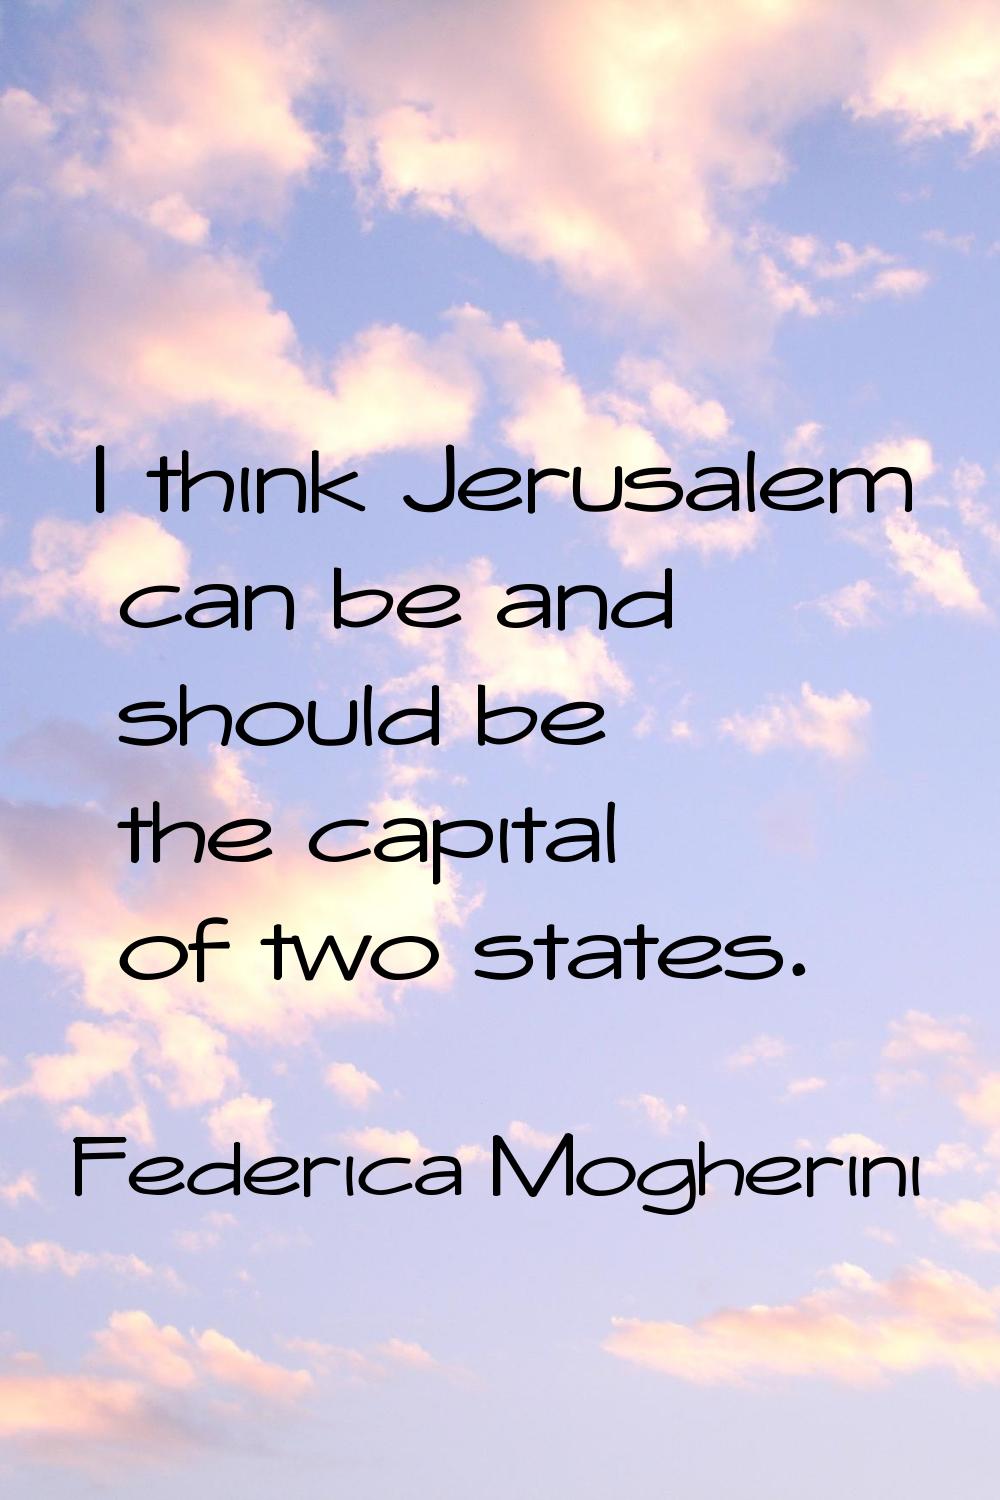 I think Jerusalem can be and should be the capital of two states.